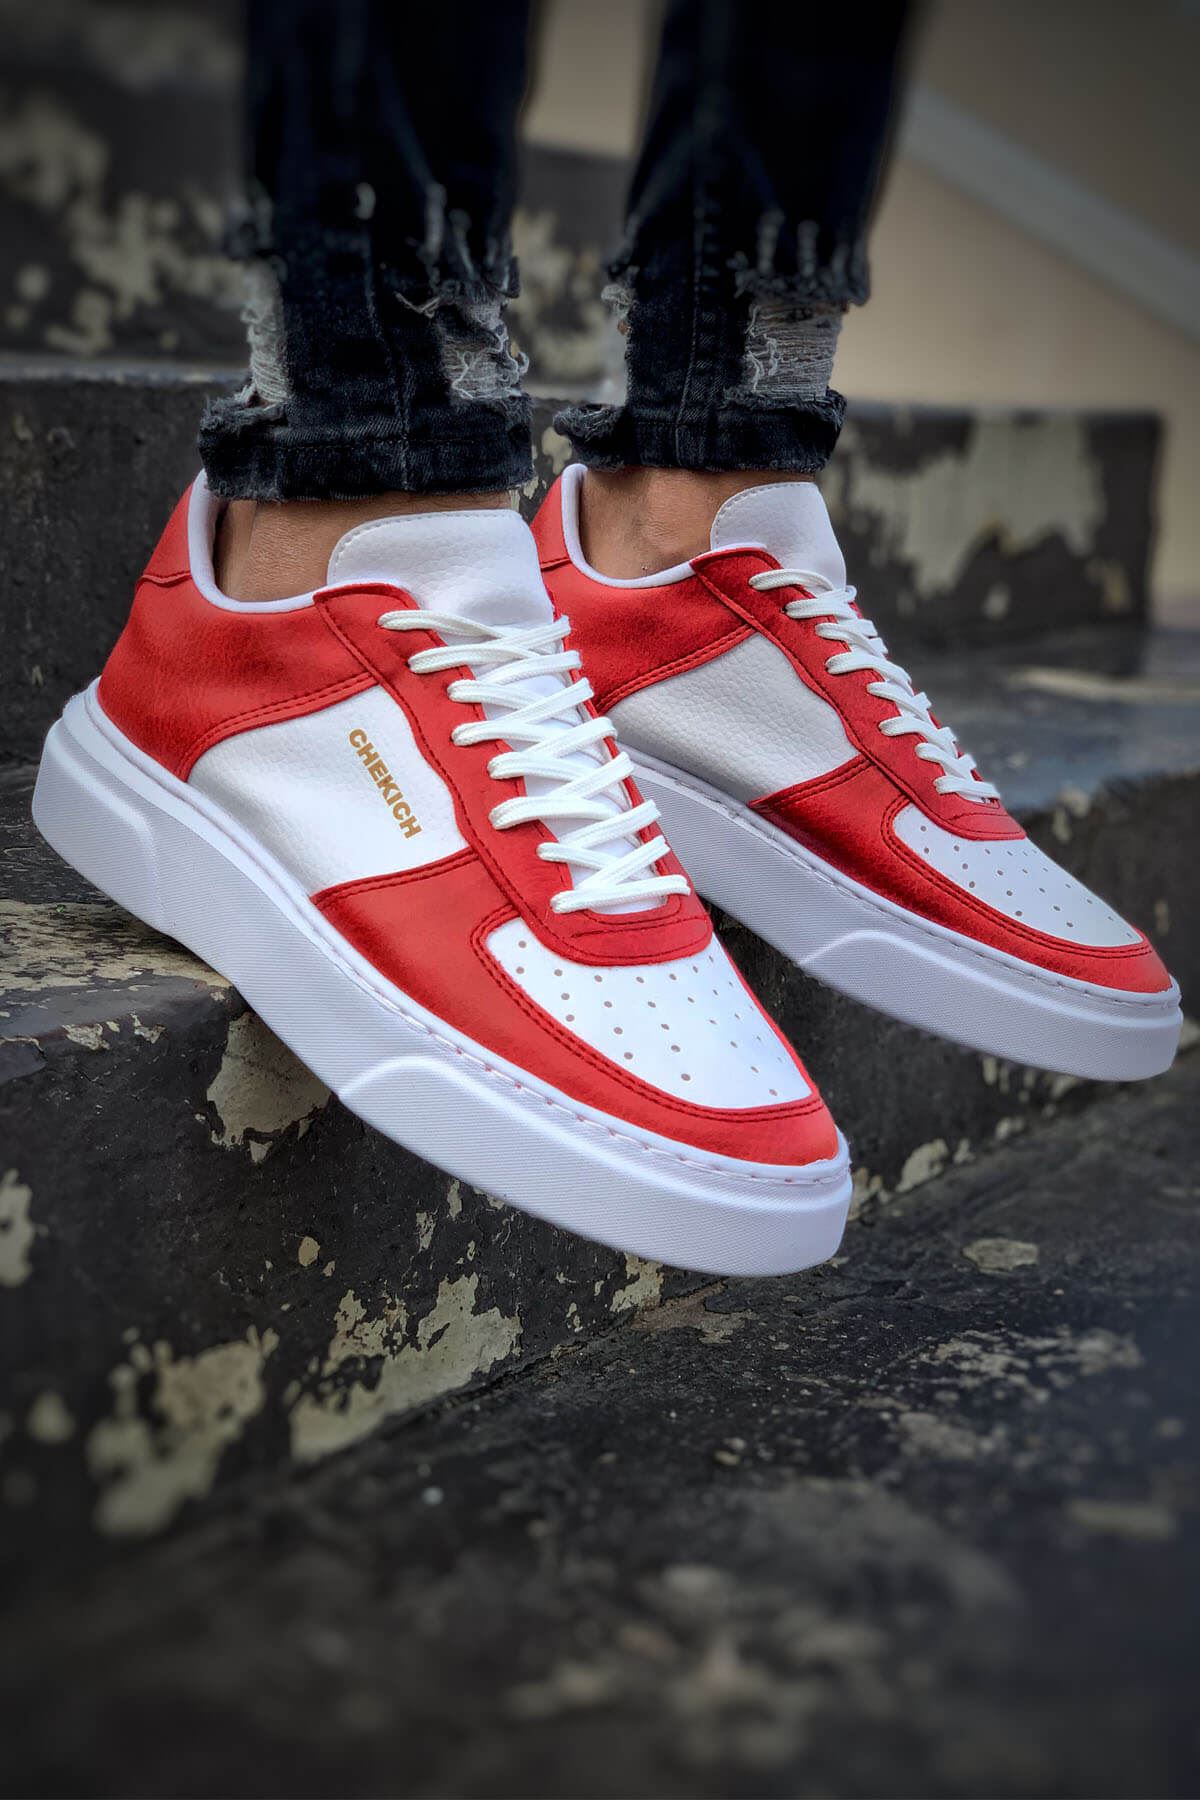 Chekich Men's Shoes Red and White Artificial Leather Lace Up Mixed Color Spring Autumn Casual Comfortable Flexible Fashion Daily Wedding Orthopedic Walking Sport Lightweight Sneakers Running Breathable Skateboard CH087